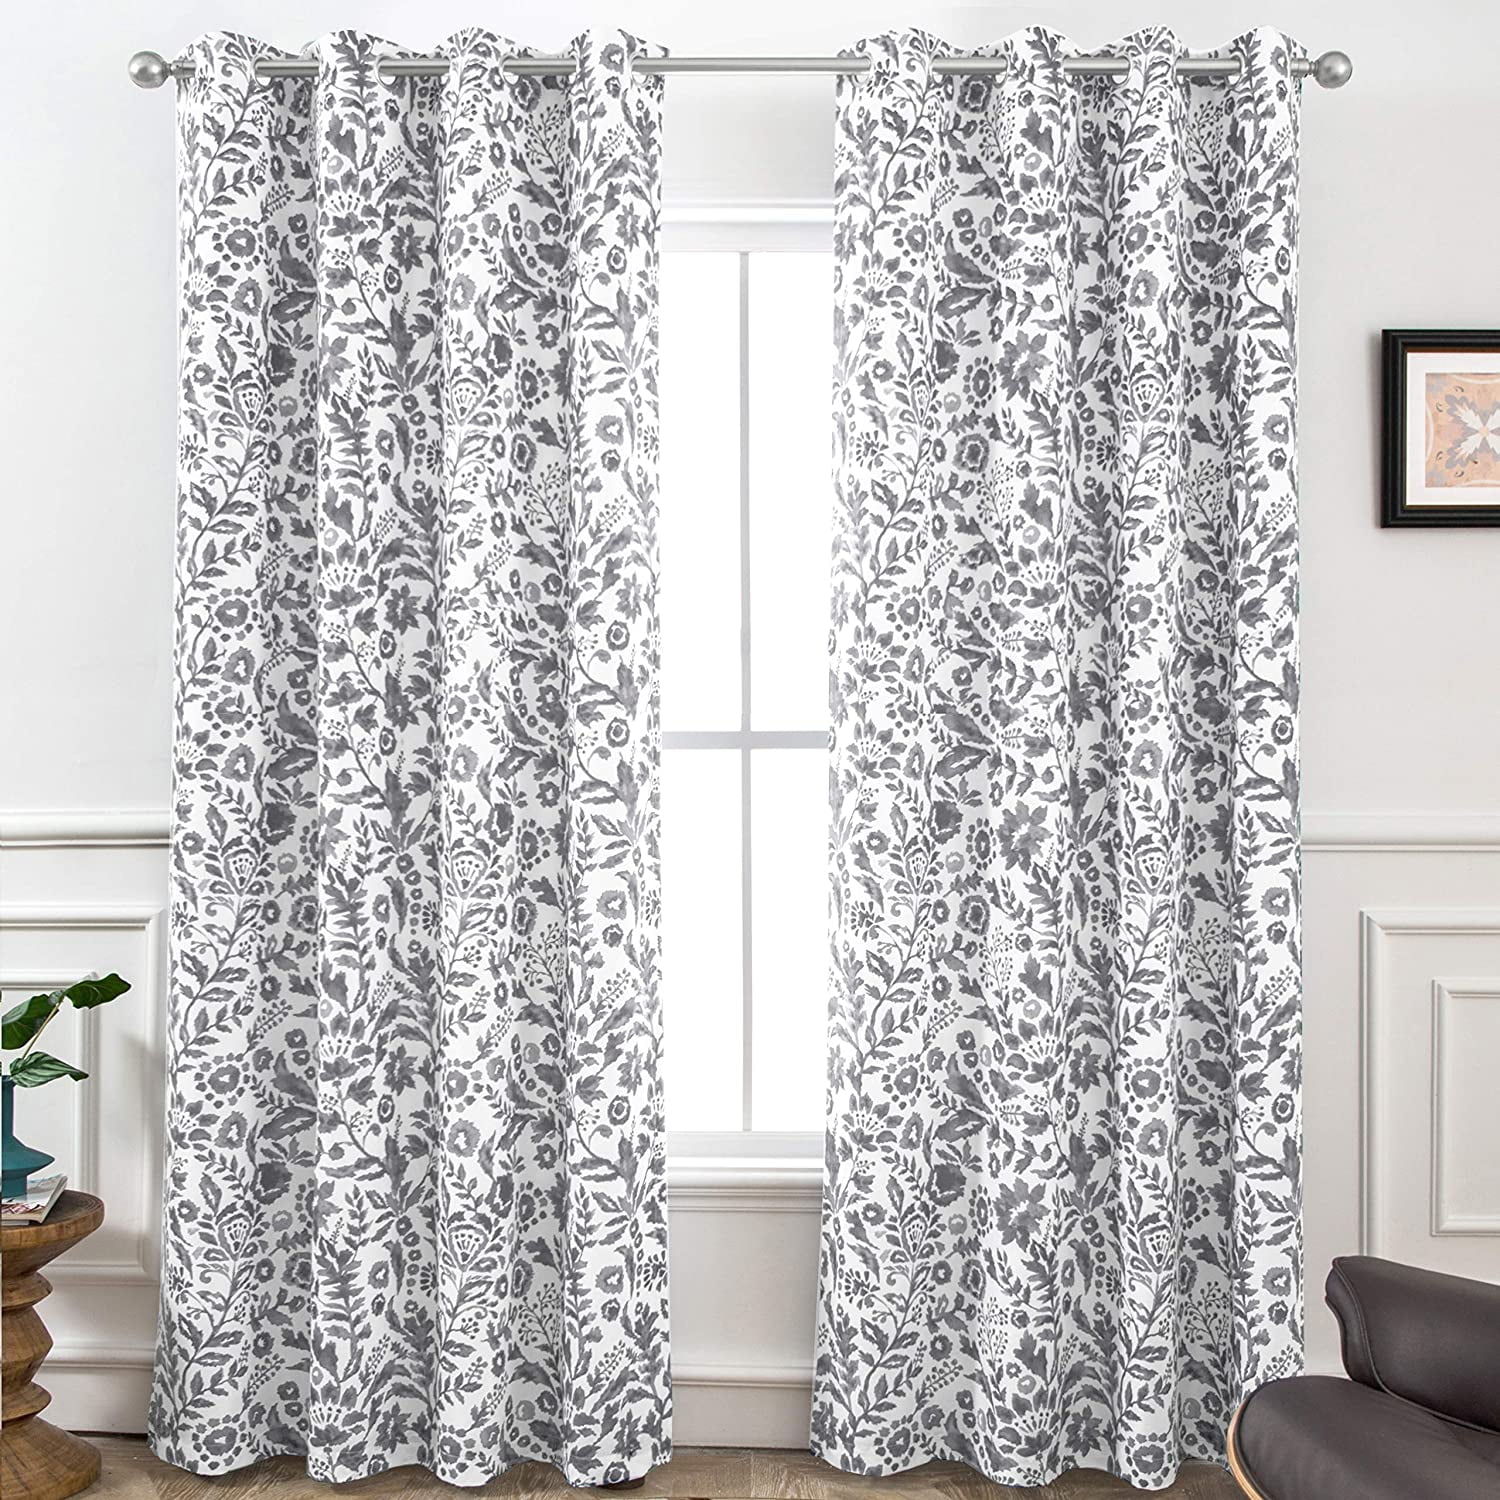 3pc 60"x36" & Swag Embroidery Curtains Set:2 Tiers 30"x36" GREY/SILVER,PAULA,ST 